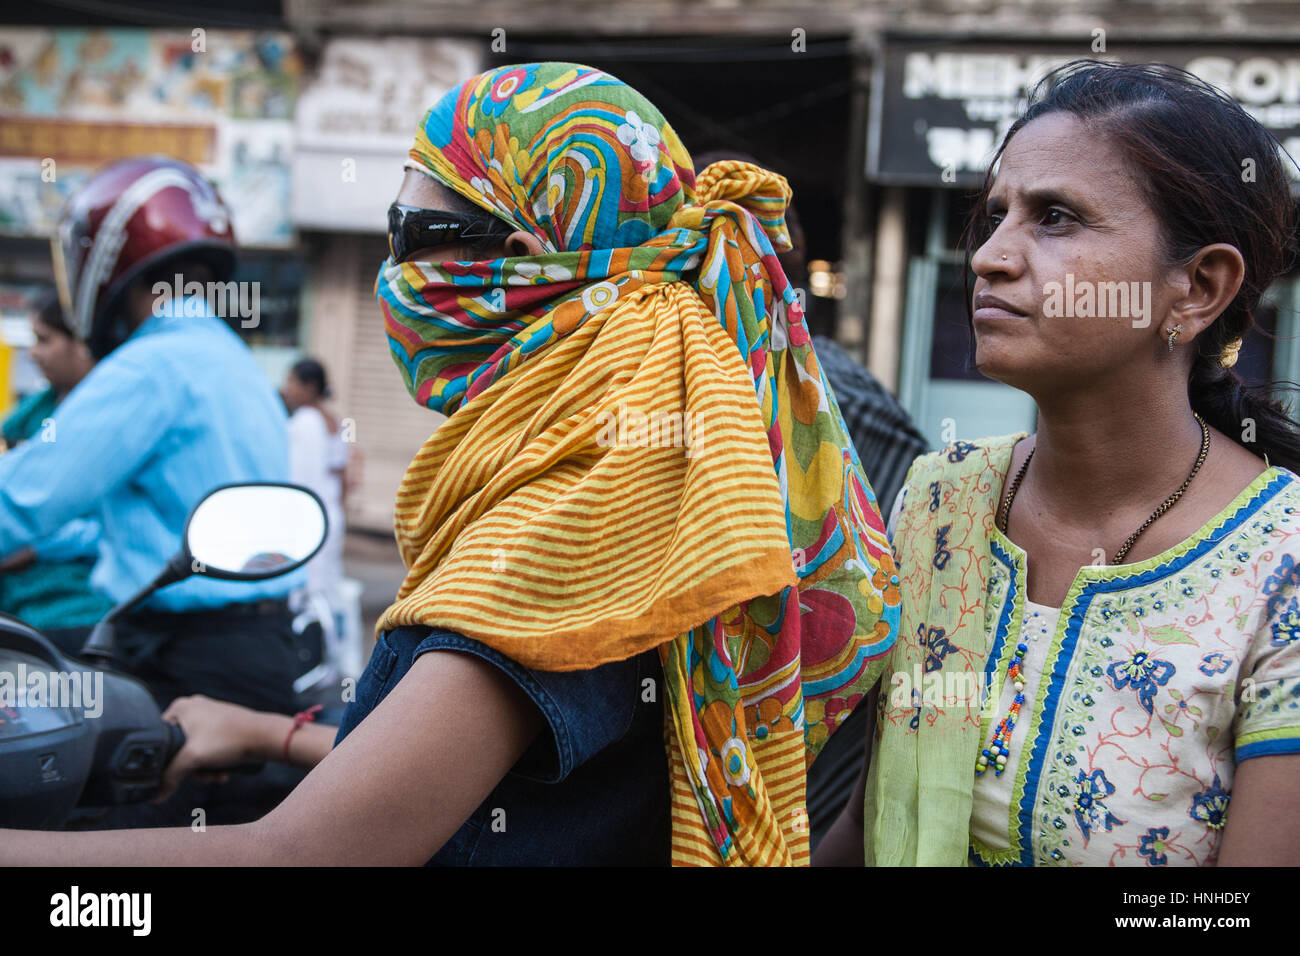 Traffic,motorbikes,scooters,pollution,pillion,passengers,wearing,face,masks,covered,fumes,pollution,Ahmedabad,Gujurat,India,Asia,Asian, Stock Photo